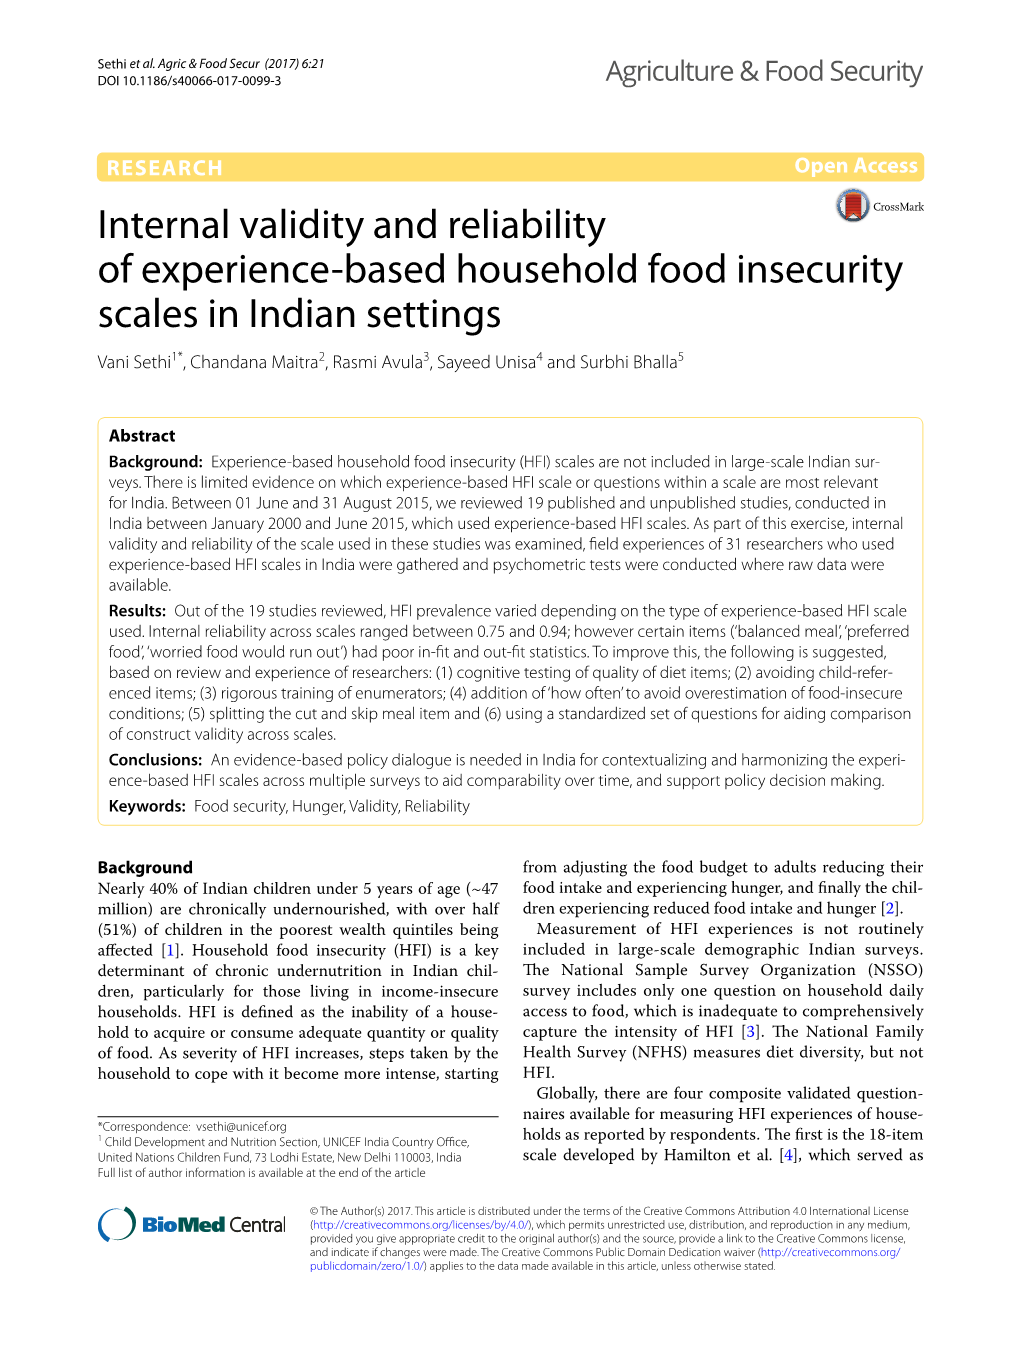 Internal Validity and Reliability of Experience-Based Household Food